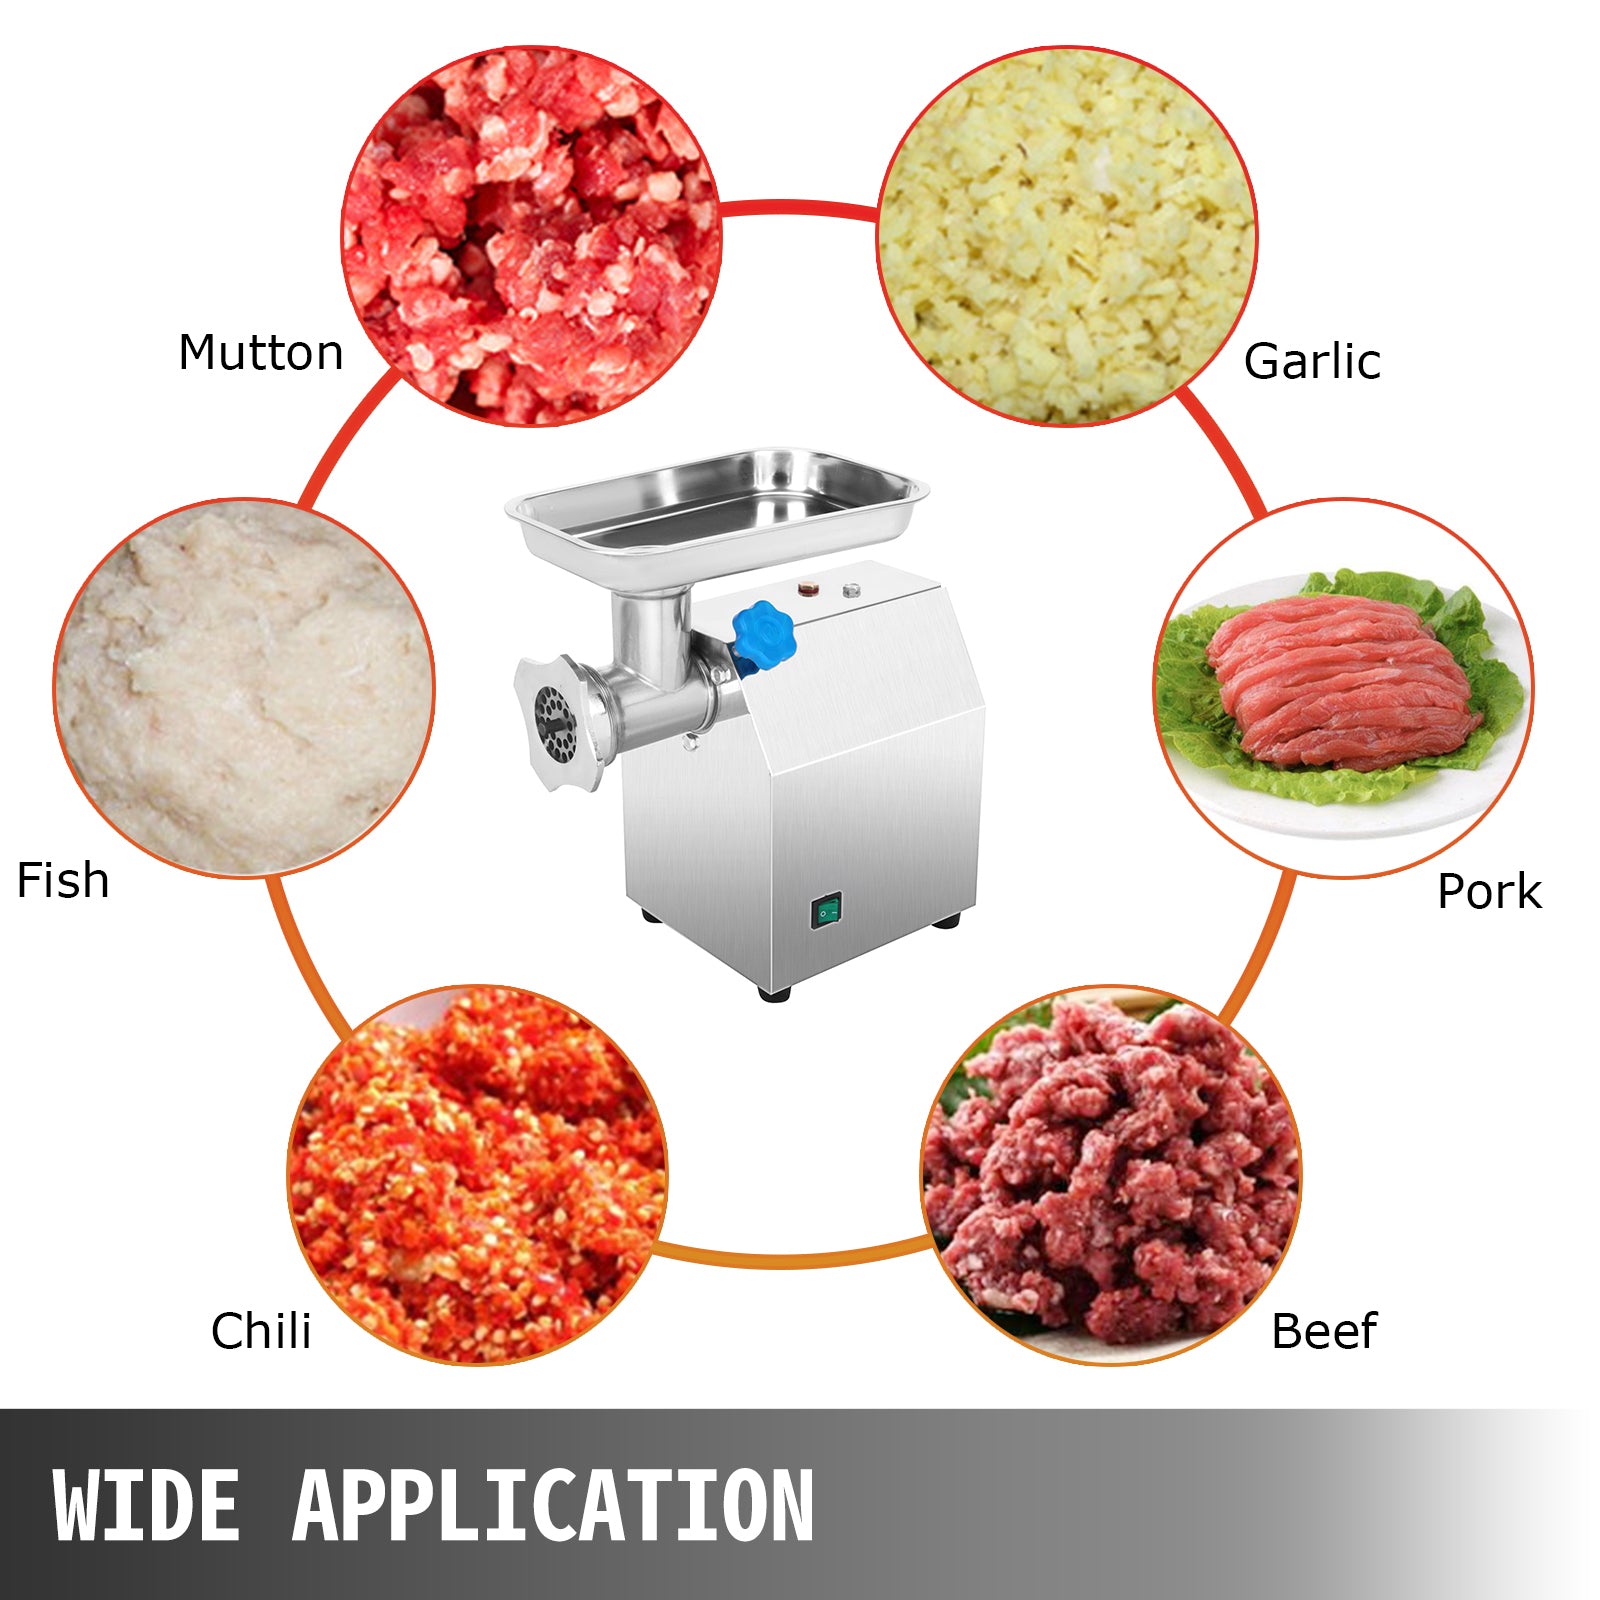 Electric Meat Grinder, 250 kg/h Capacity, 1100W Power